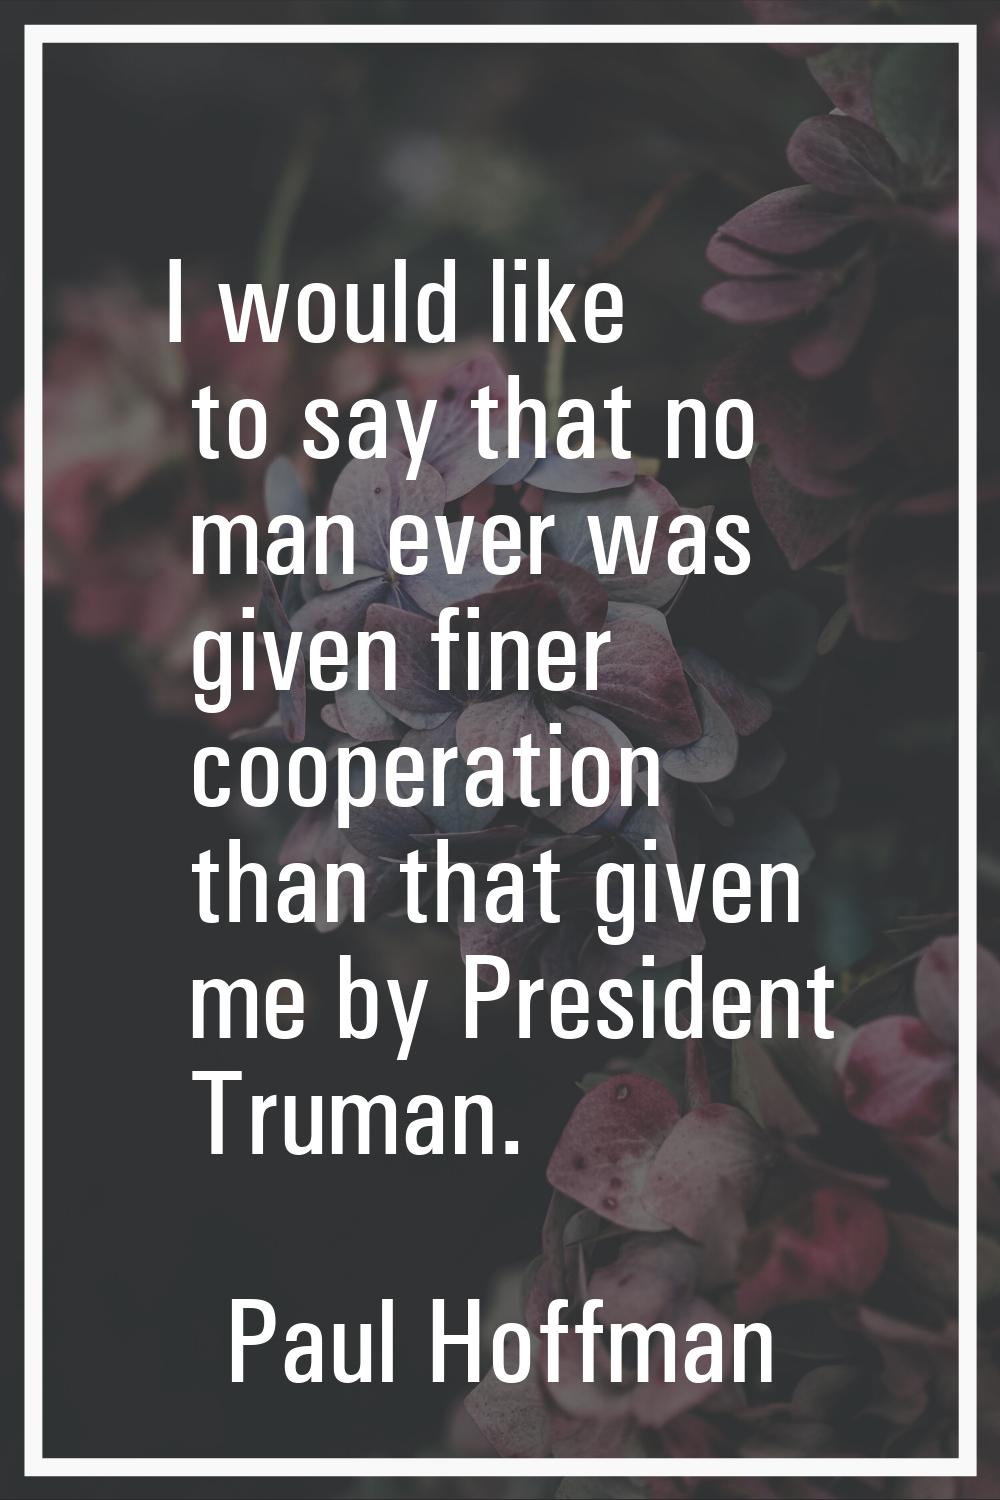 I would like to say that no man ever was given finer cooperation than that given me by President Tr